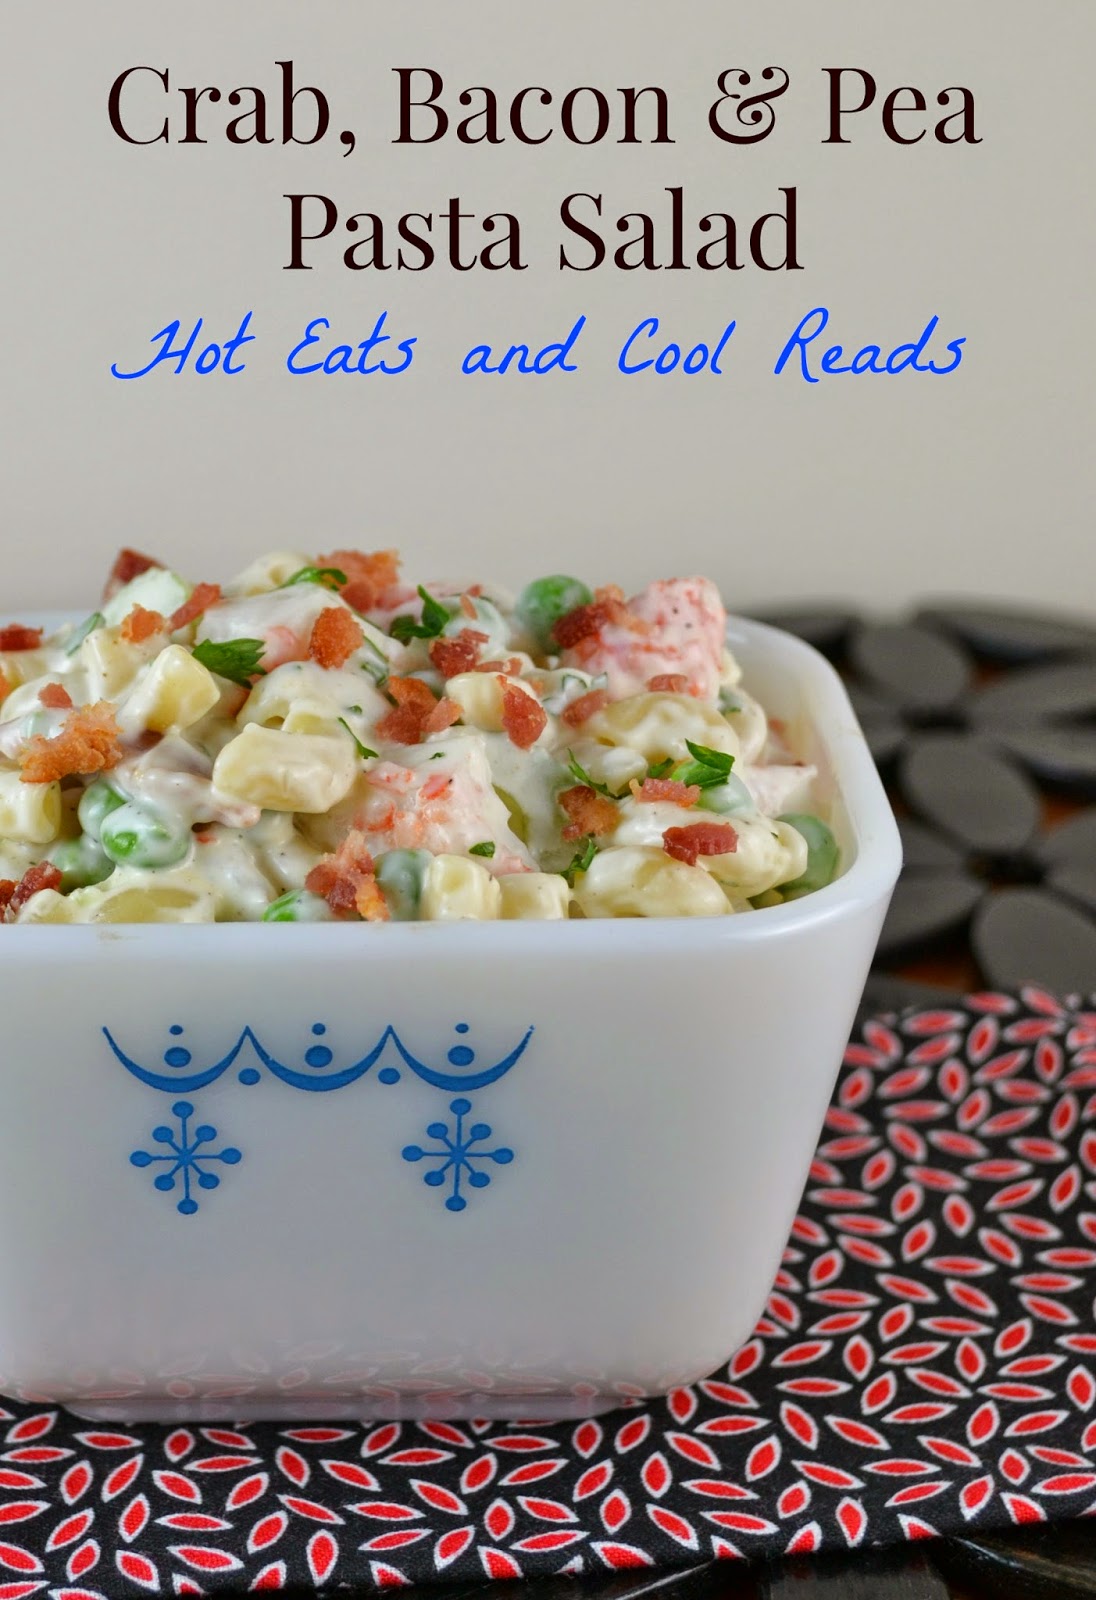 Hot Eats and Cool Reads: Crab, Bacon and Pea Pasta Salad Recipe